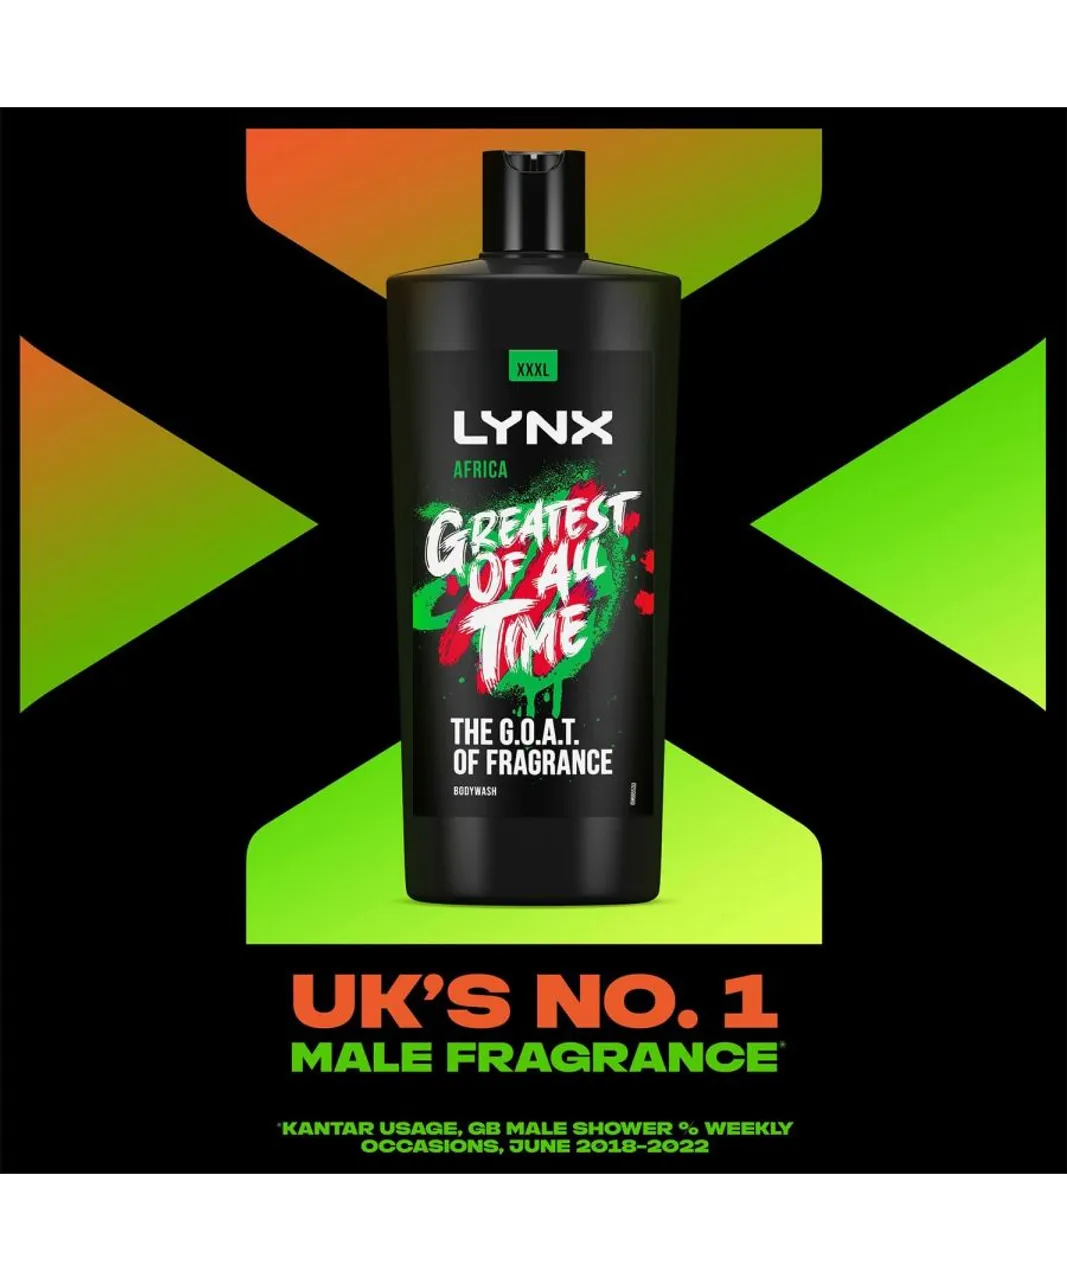 Lynx Mens G.O.A.T Shower Gel up to 12H Refreshing Fragrance XXXL Africa 700ml, 6 Pack - NA - One Size